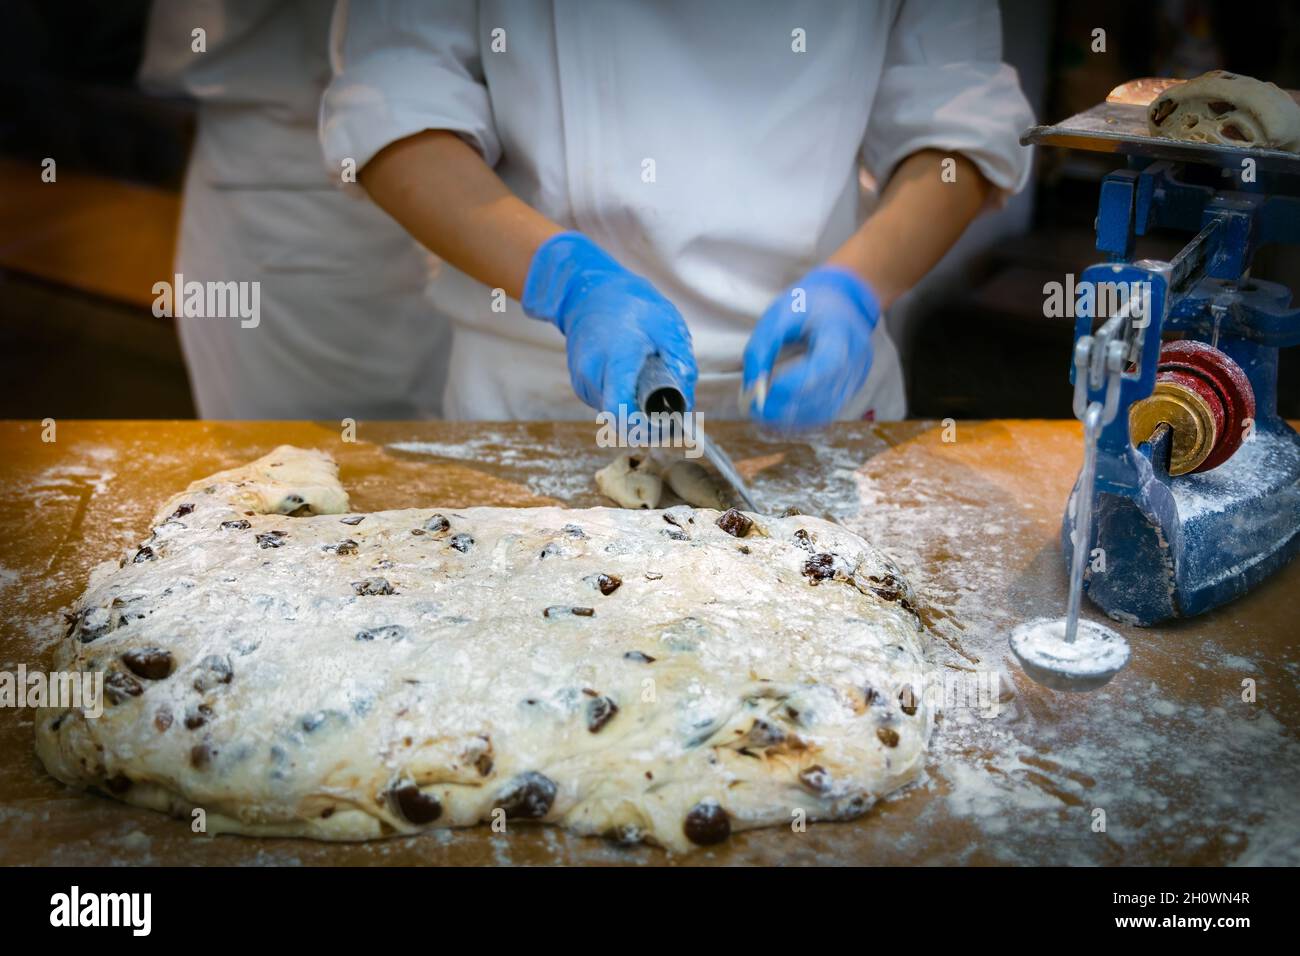 A baker cuts and weighs dough on a scale for chocolate chip cookies at a bakery in Hiroshima, Japan. Stock Photo